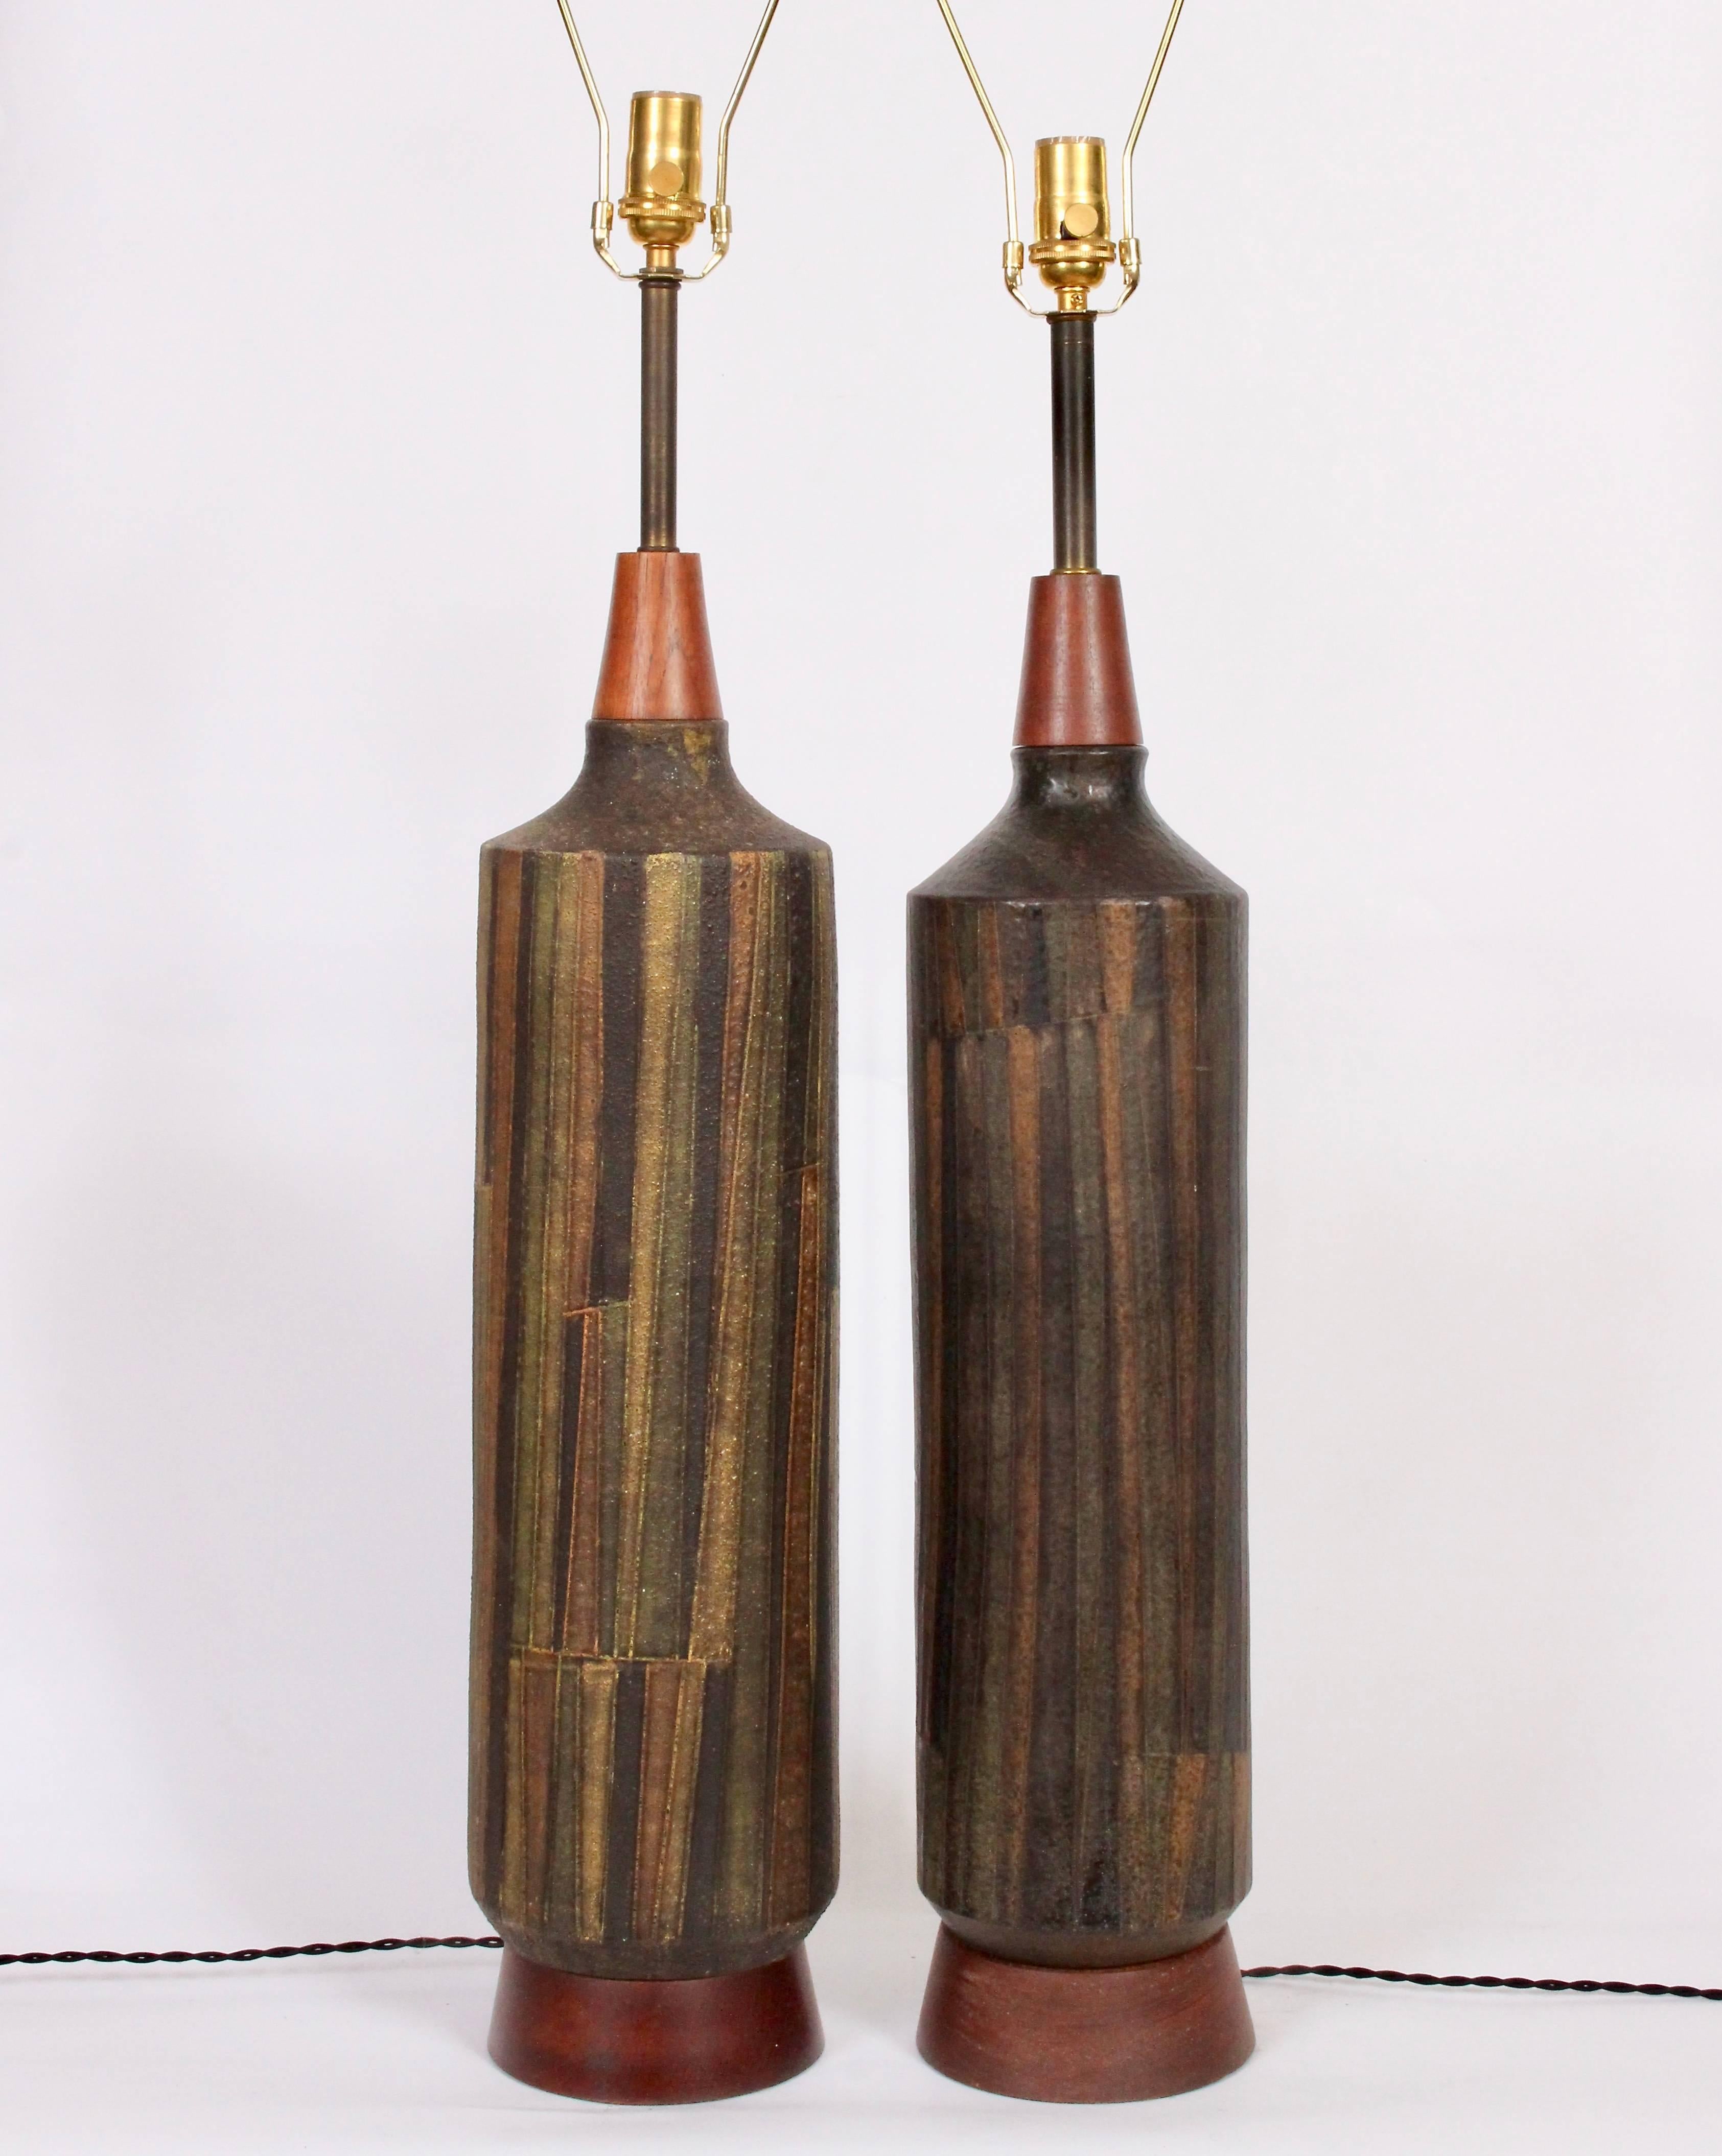 Two Milano Moderna Aldo Londi by Bitossi for Raymor Geometric Art Pottery Table Lamps. Small footprint. Featuring a cylindrical bottle form, conical teak detail, brass neck atop turned teak bases. With Milano Moderna knife cut relief and dark